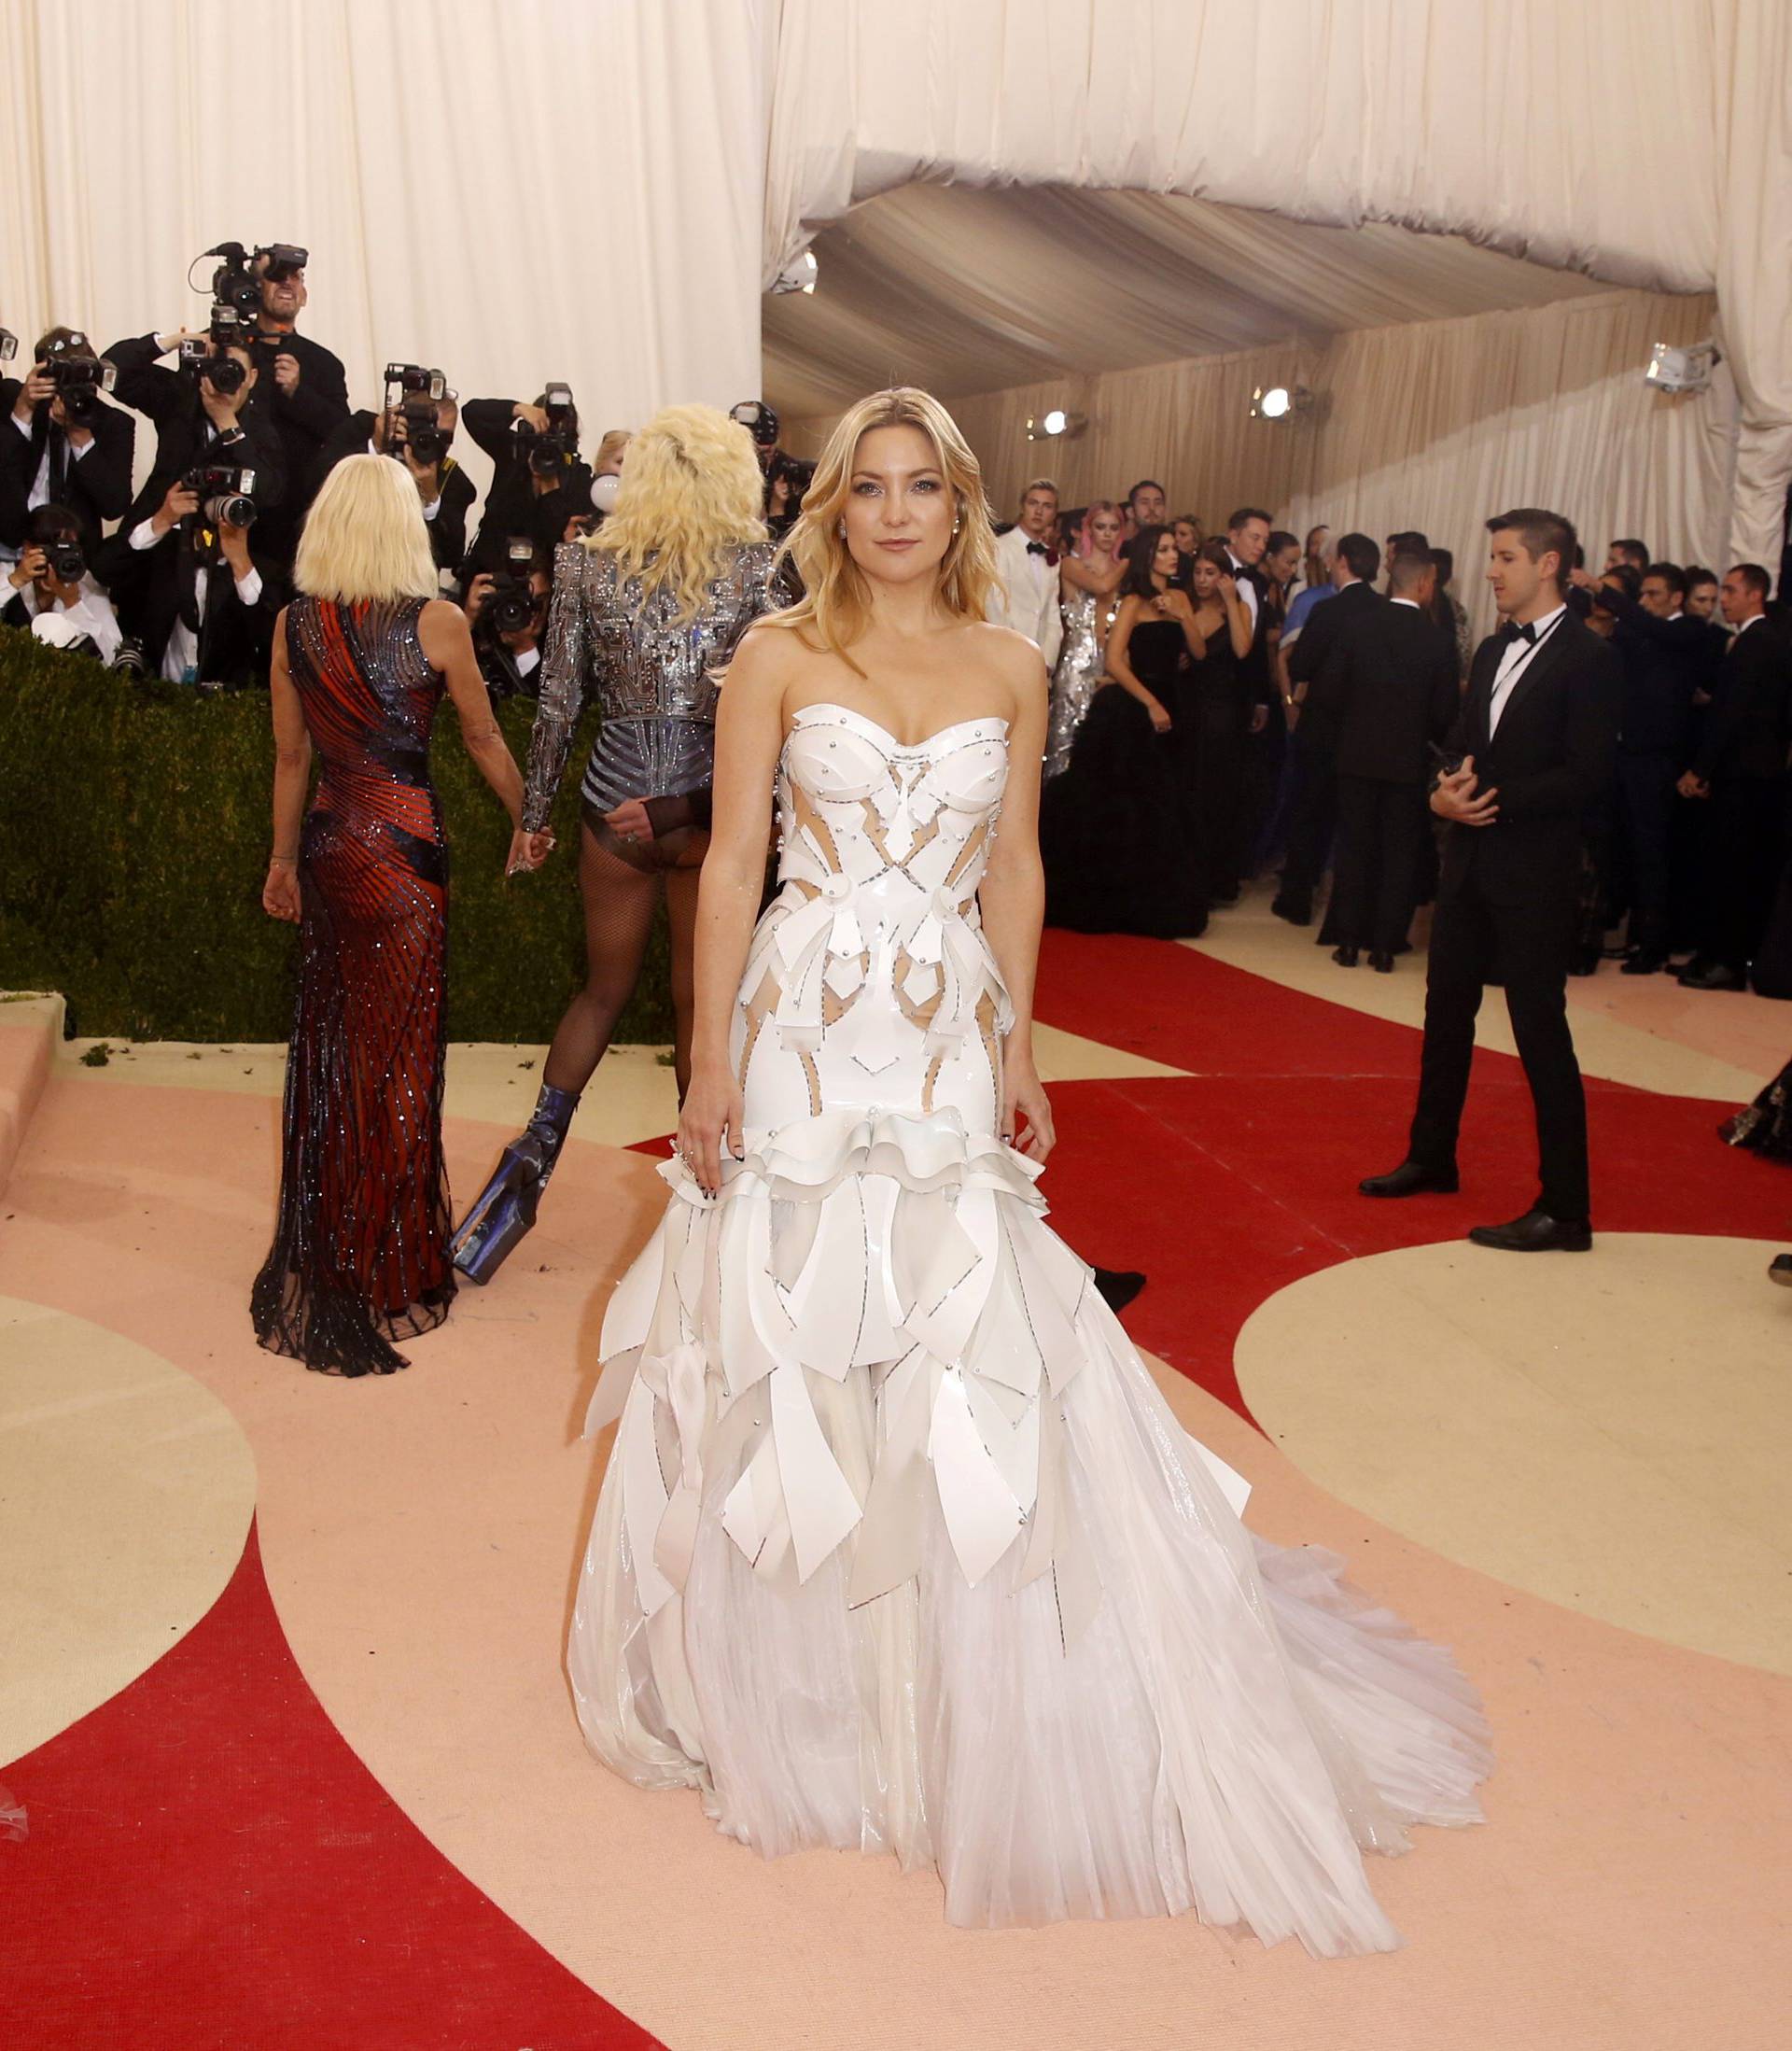 Actress Kate Hudson arrives at the Met Gala in New York